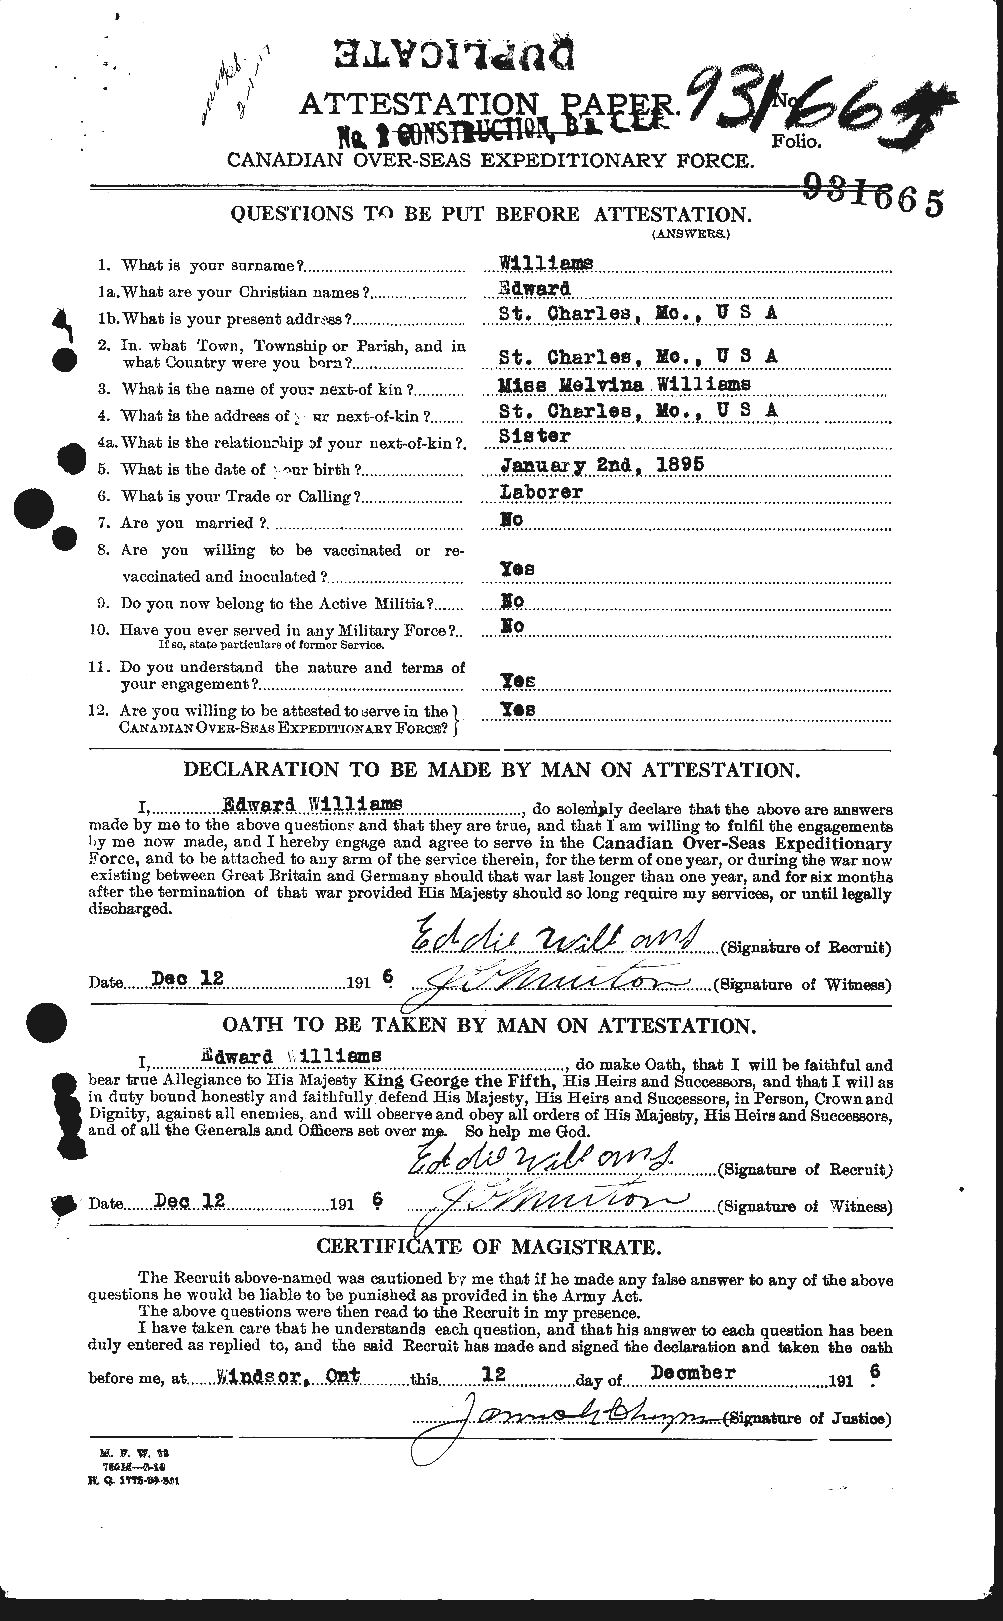 Personnel Records of the First World War - CEF 674536a